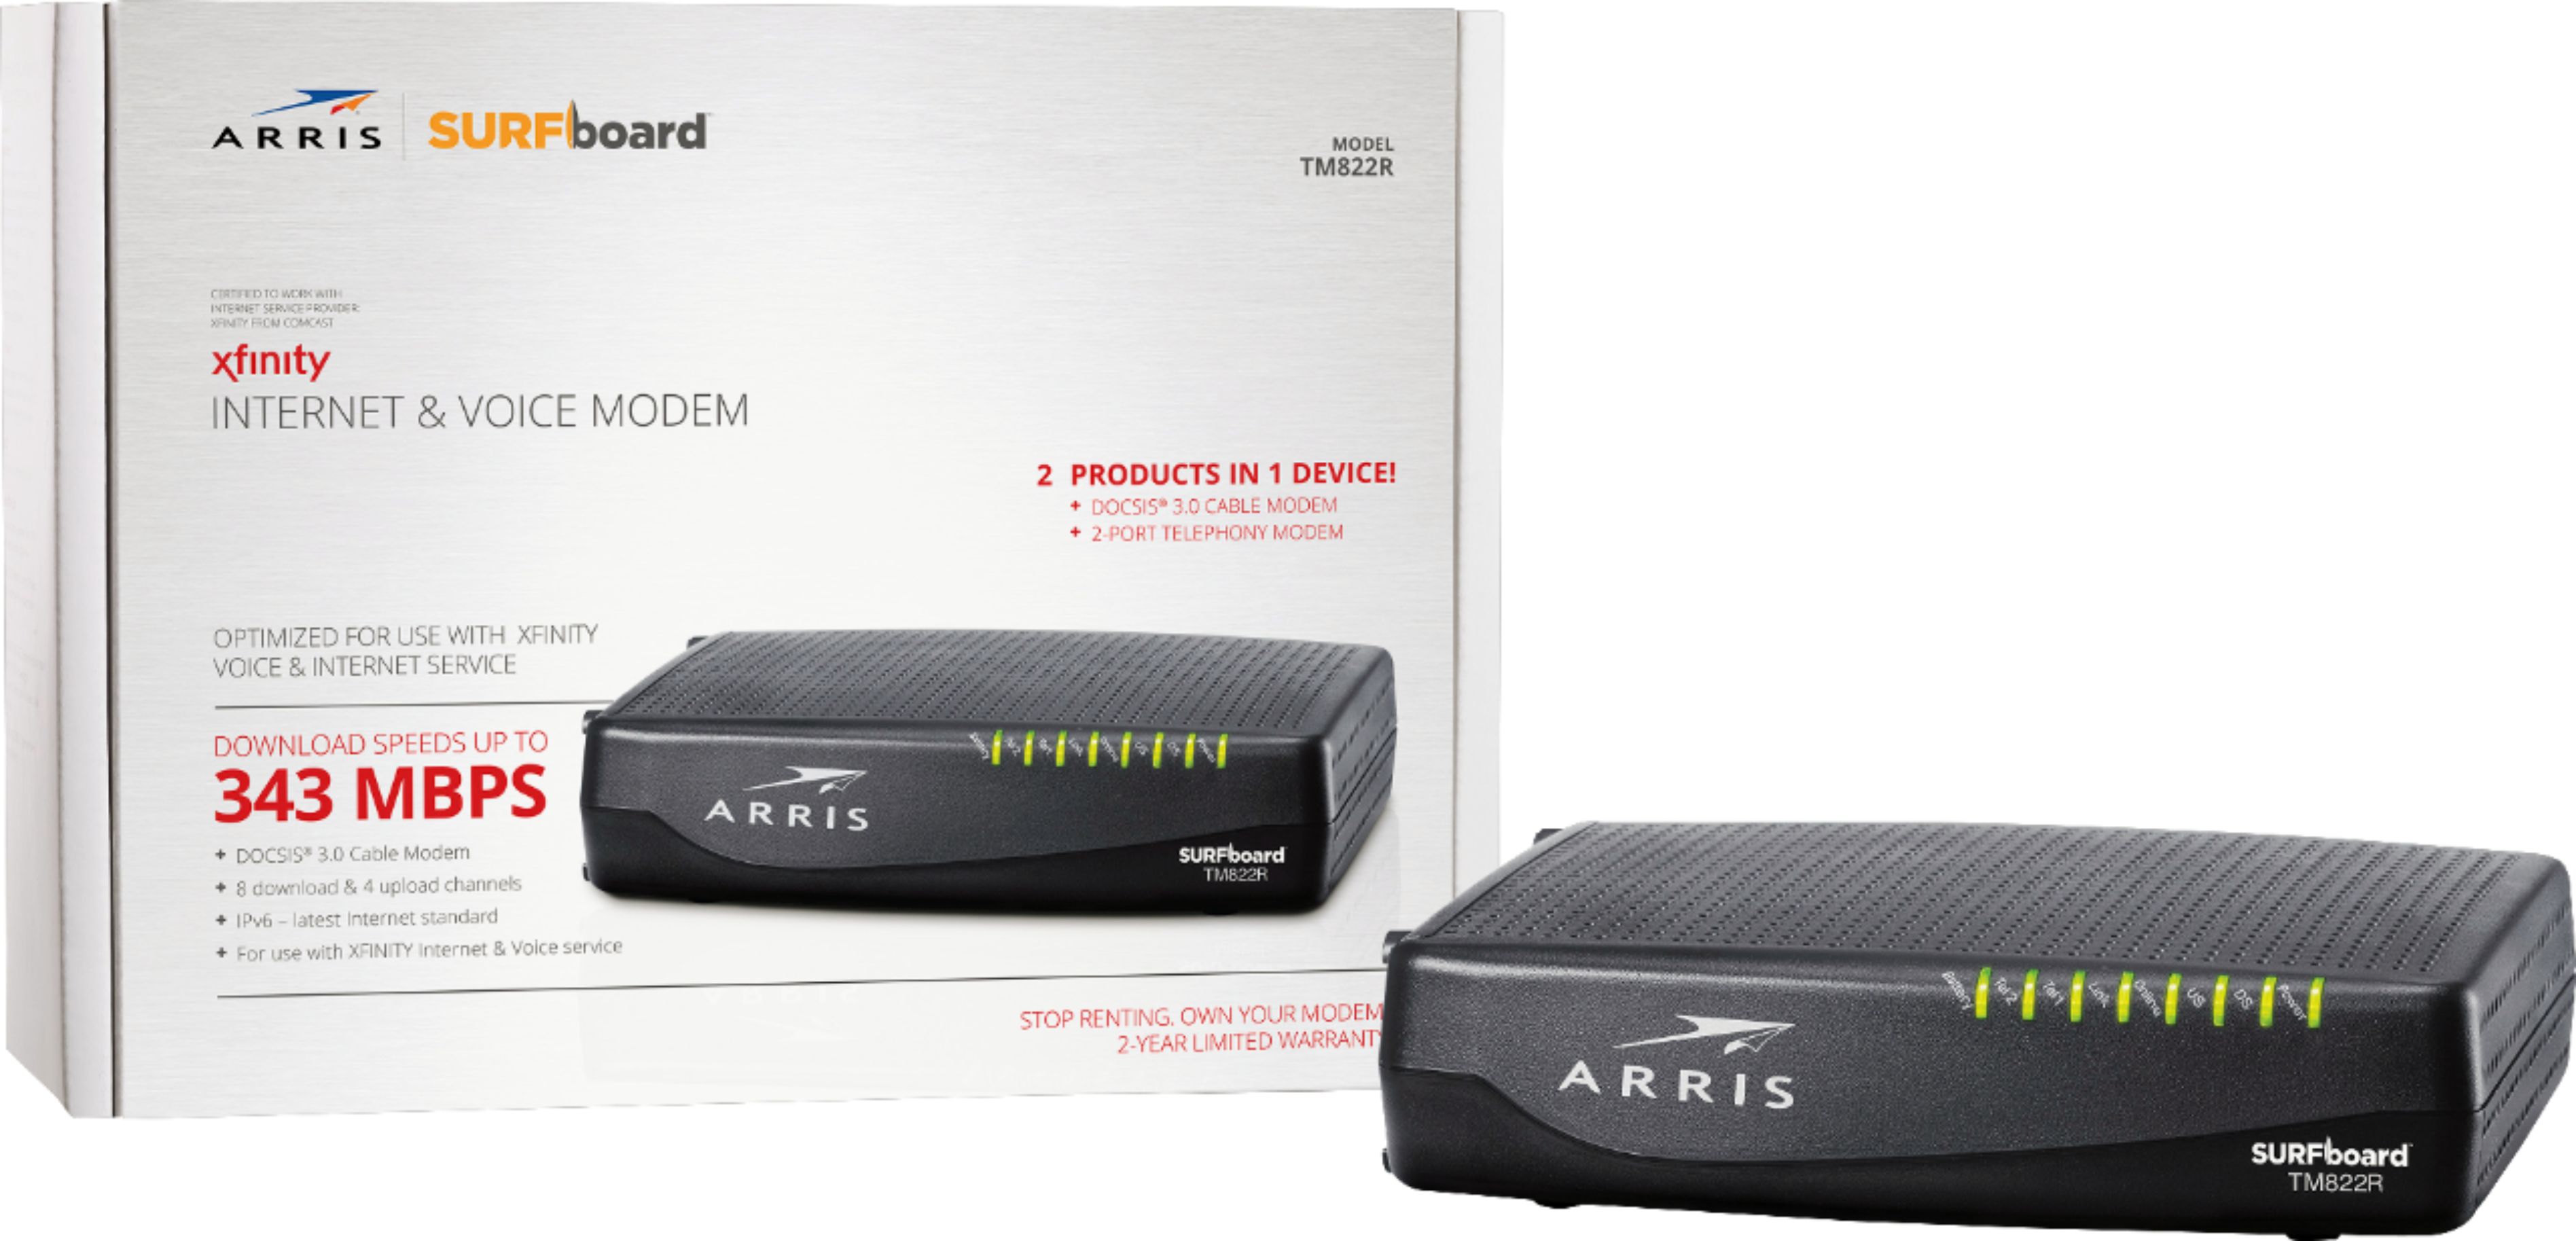 TM822R Download Speed:  343 Mbps Renewed ARRIS Surfboard Docsis 8X4 Cable Modem / Telephone Certified for XFINITY 